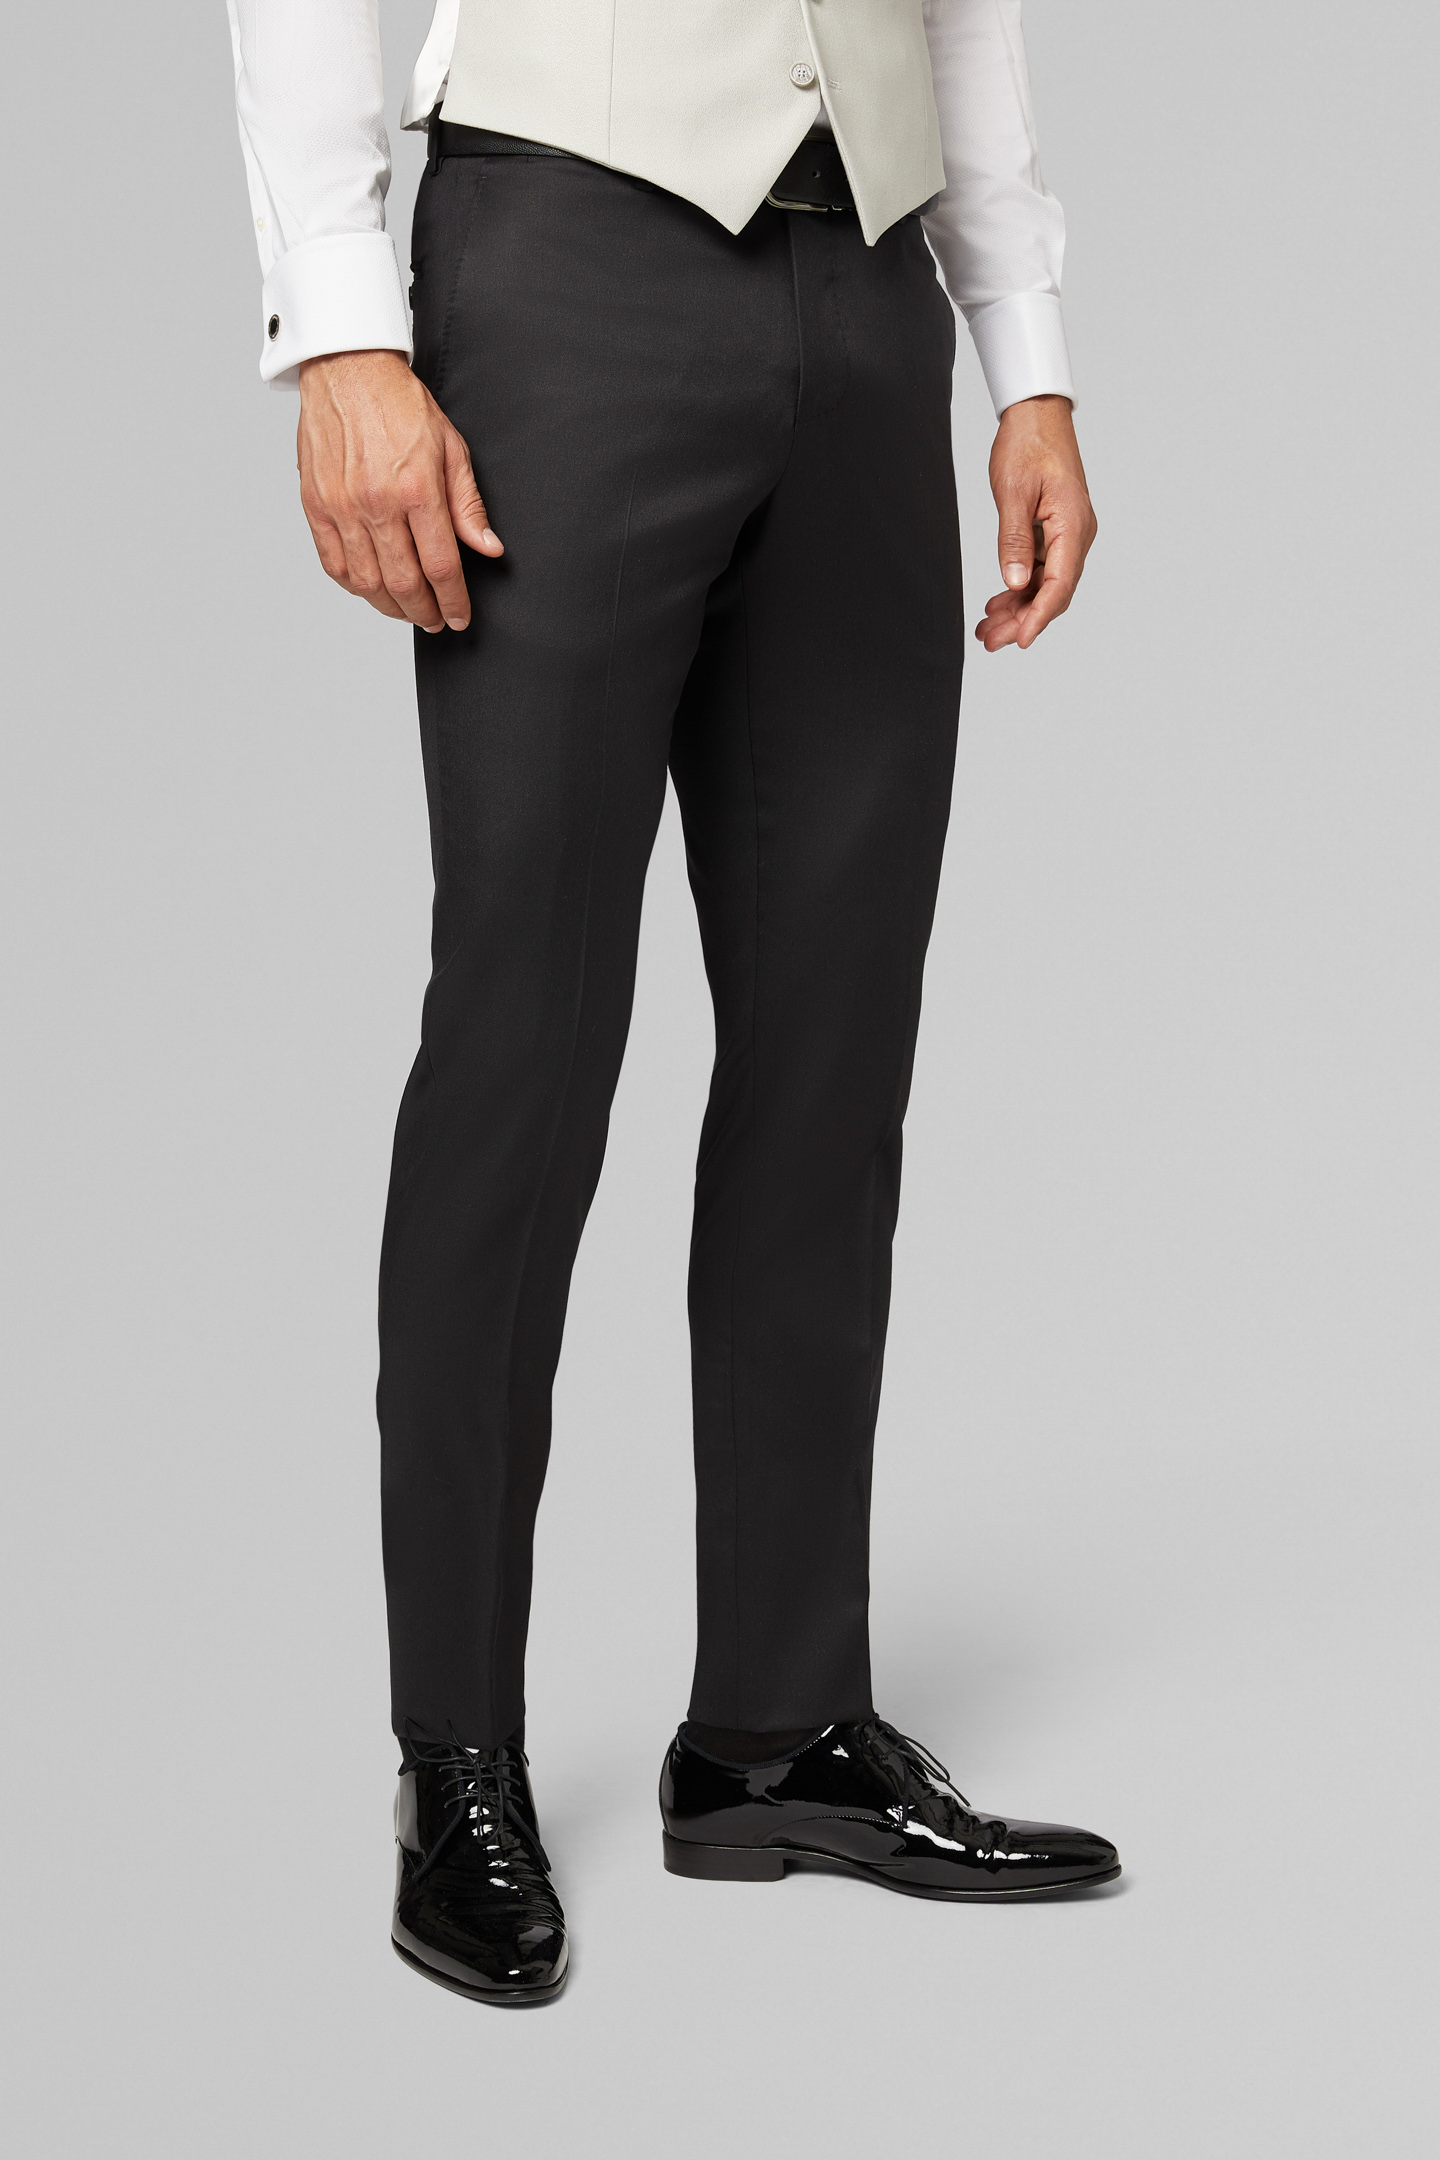 Occasions, Grey Slim Fit Suit Trousers